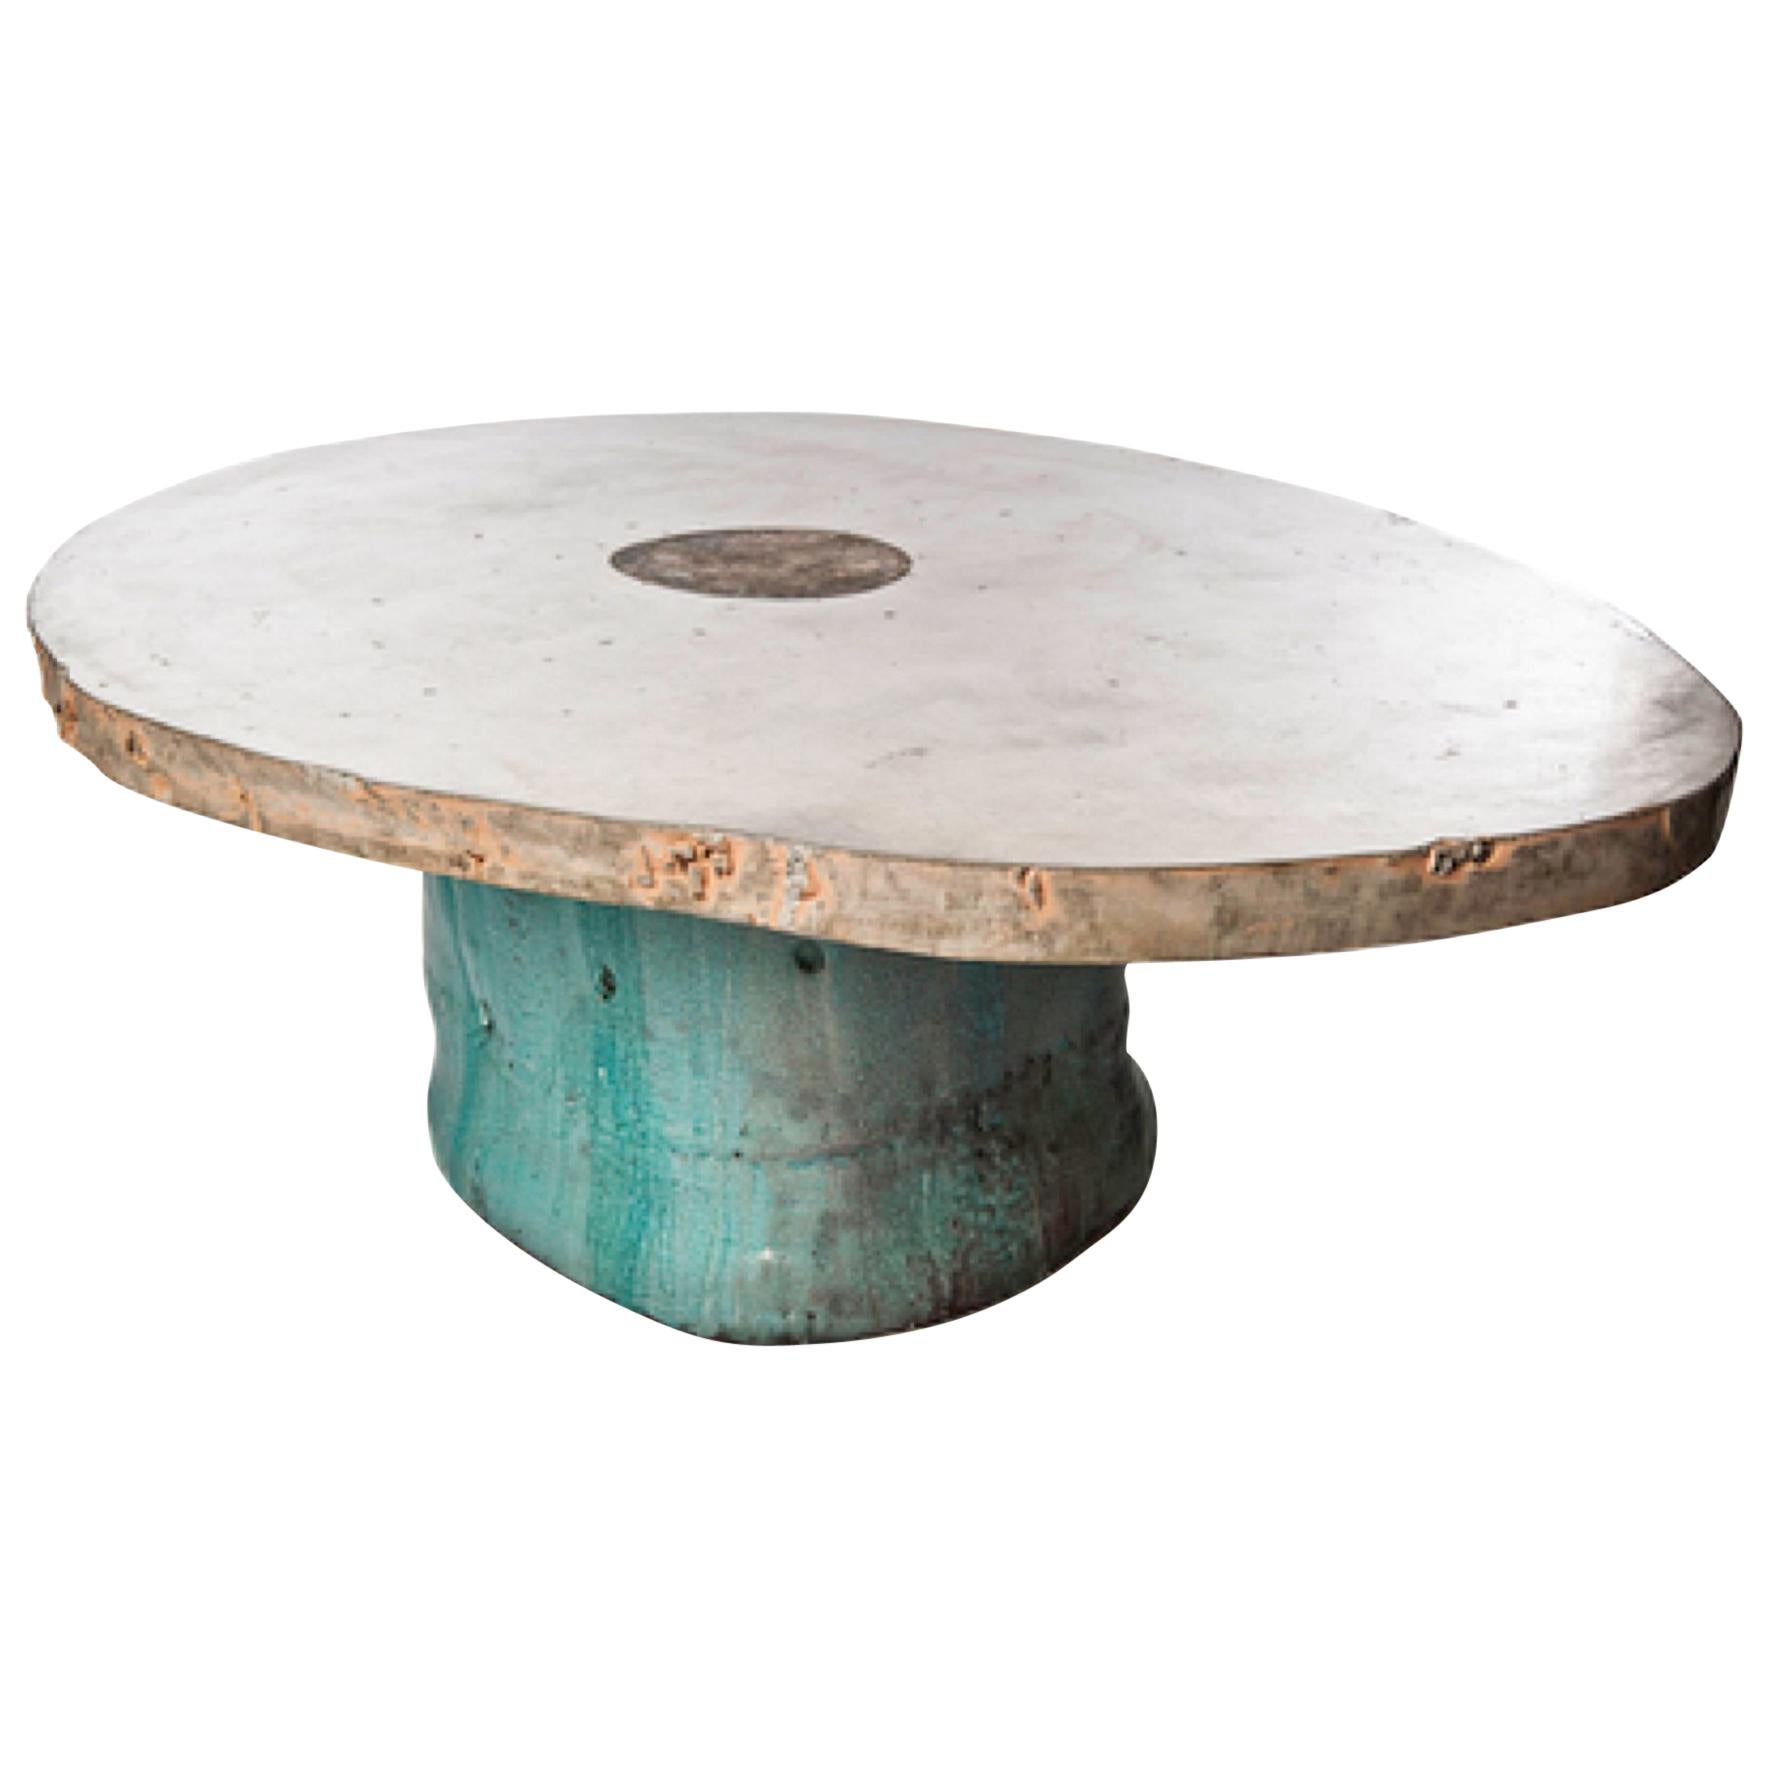 Low Table in Ceramic with Concrete Top by Hun-Chung Lee